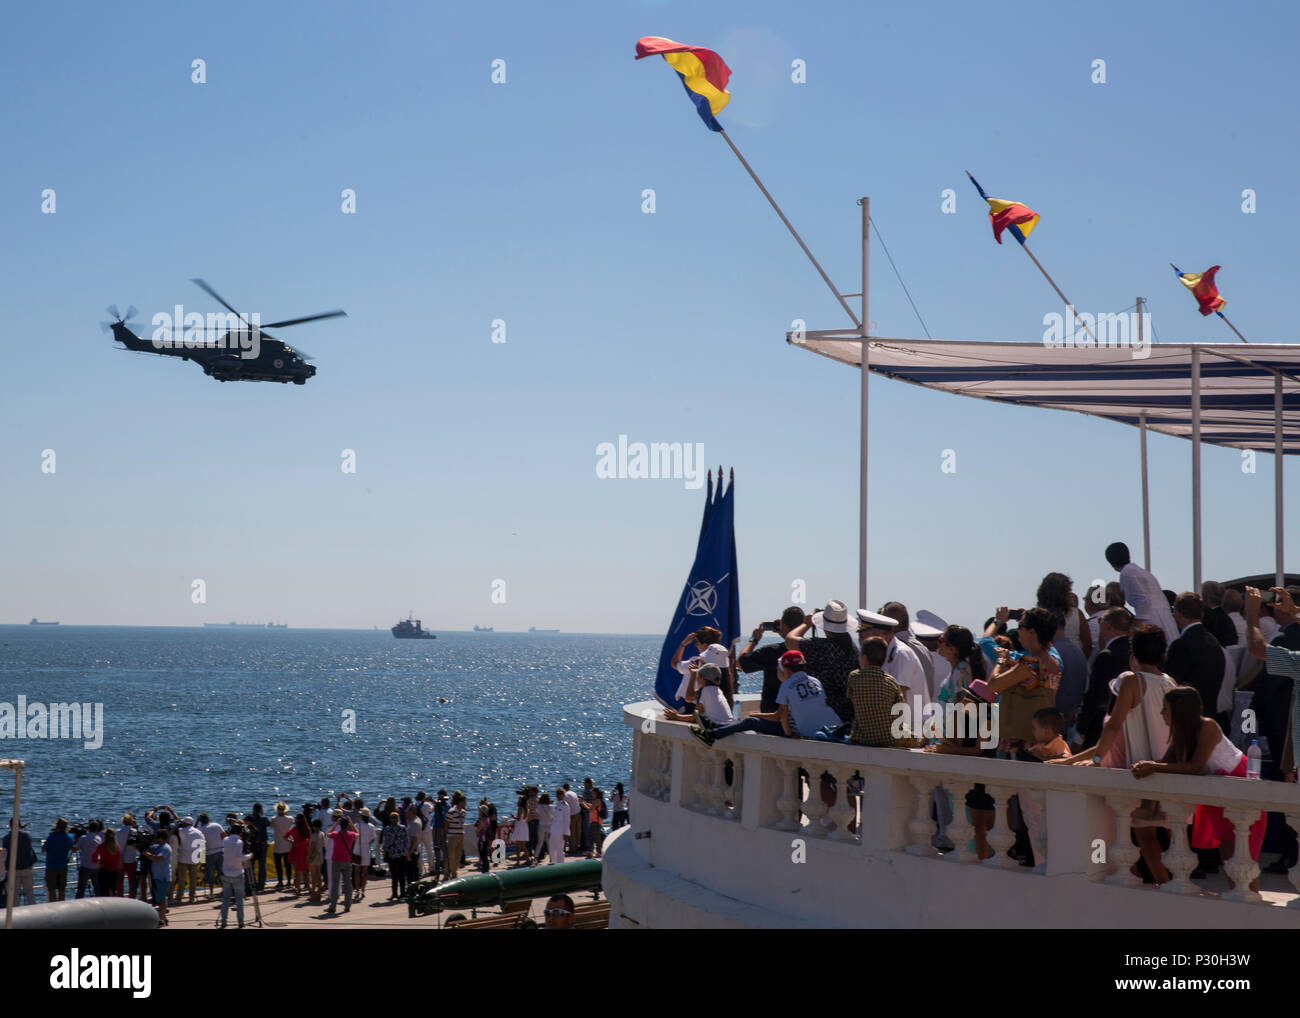 A Romanian helicopter delights a crowd of spectators during the 114th annual Navy Day celebration at the Port of Constanţa, Romania, Aug. 15, 2016. U.S. Sailors and Marines supporting the Black Sea Rotational Force 16.2 helped pay tribute to the prestigious history of the Romanian navy and highlighted the military’s movement toward new developments and modernizations. Black Sea Rotational Force is an annual multilateral security cooperation activity between the U.S. Marine Corps and partner nations in the Black Sea, Balkan and Caucasus regions designed to enhance participants’ collective profe Stock Photo